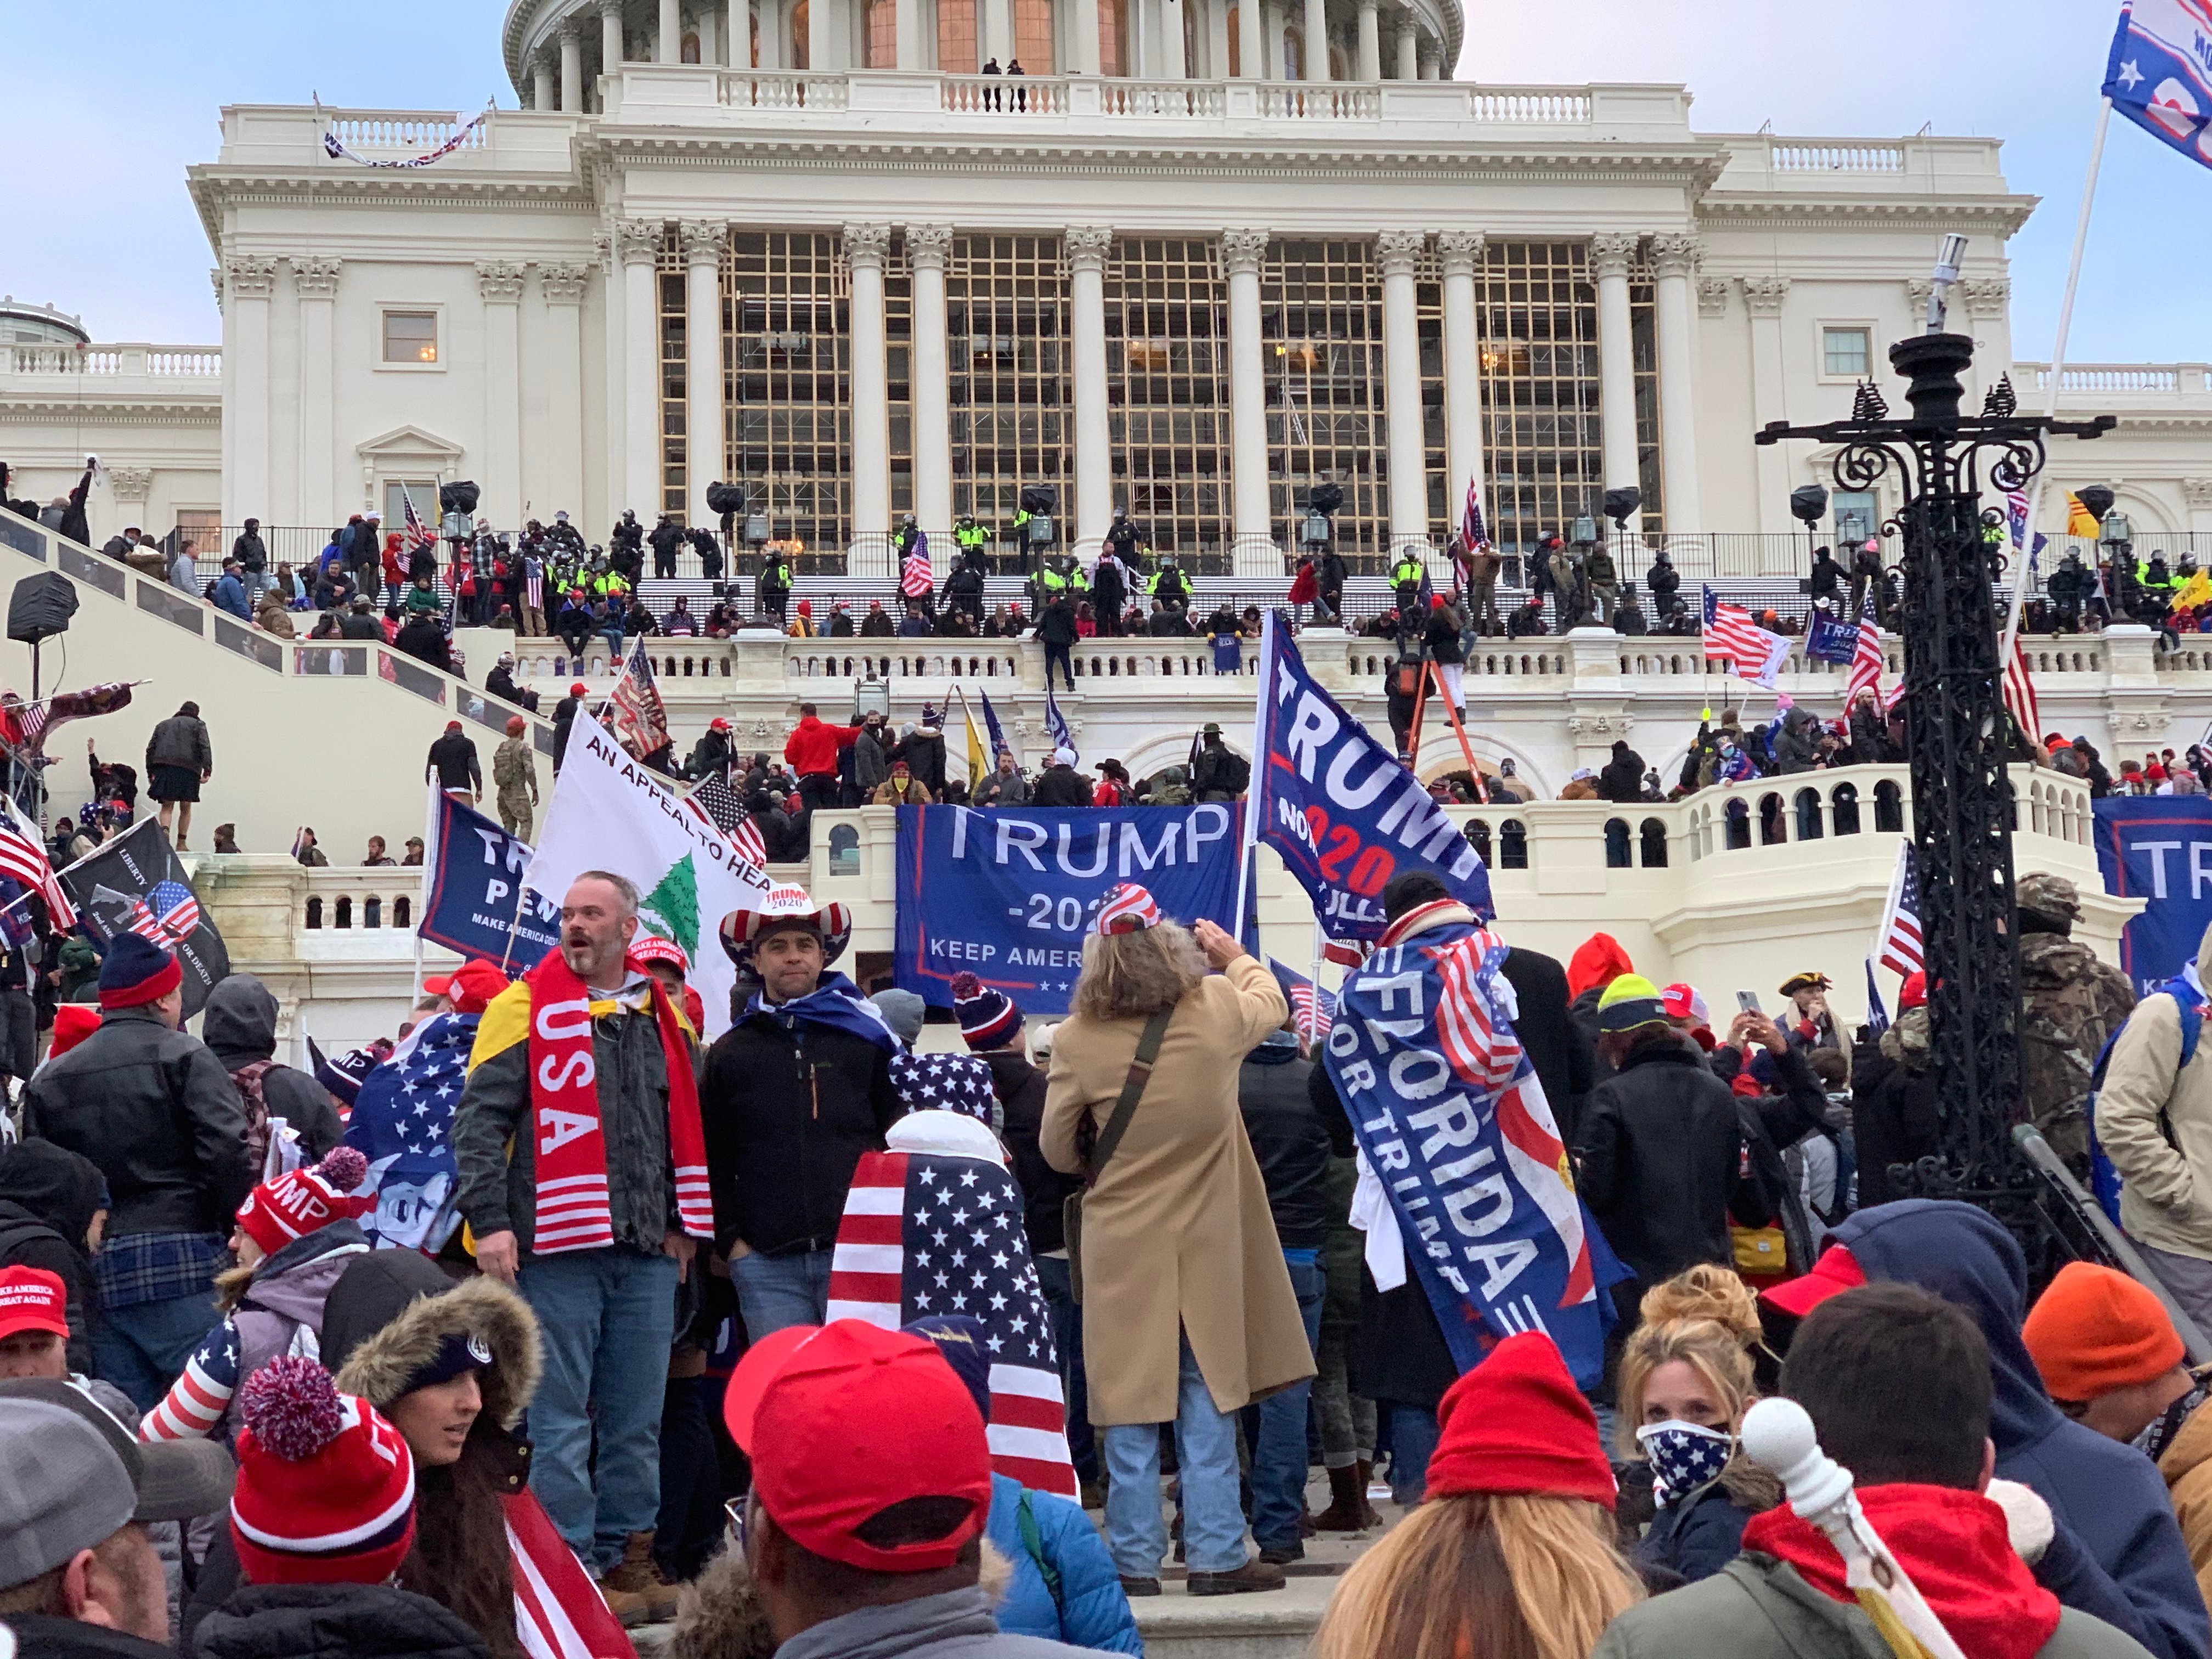 Rally at the capital